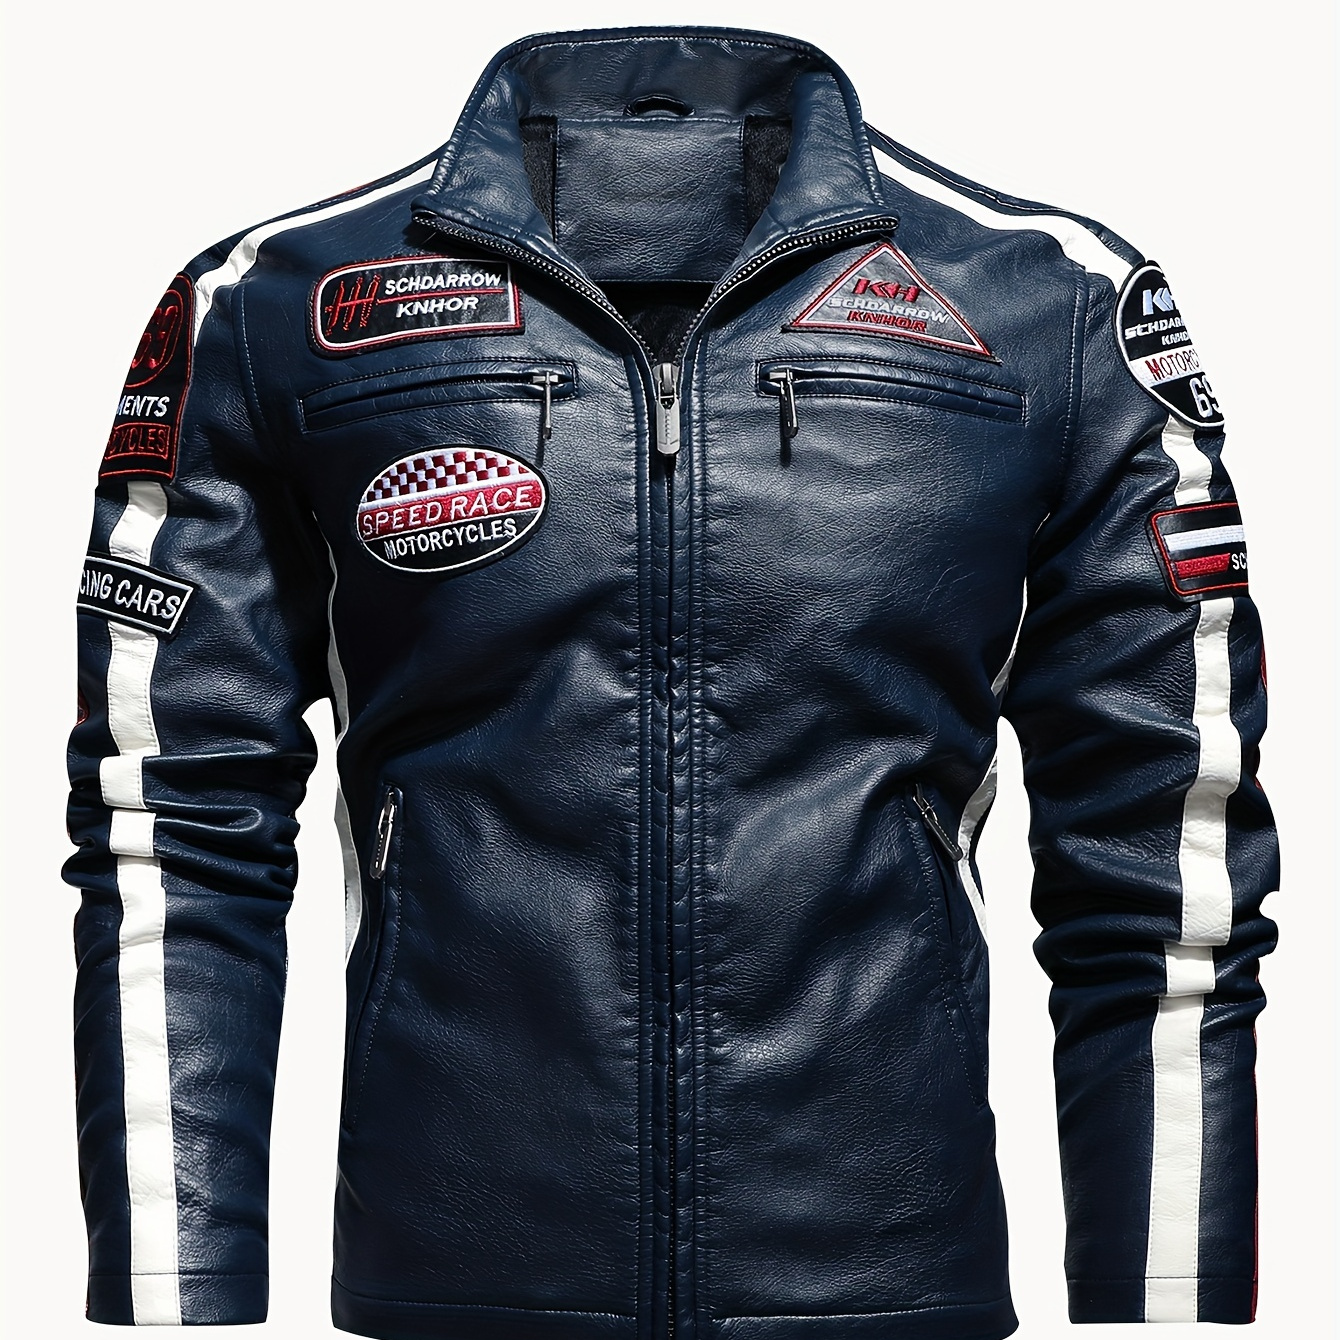 

Men's Retro Style Long Sleeve Zip Up Motorcycle Jacket With Stand Collar, Zippered Pockets And Label Pieces, Stylish And Trendy Jacket With Fleece For Outdoors Wear